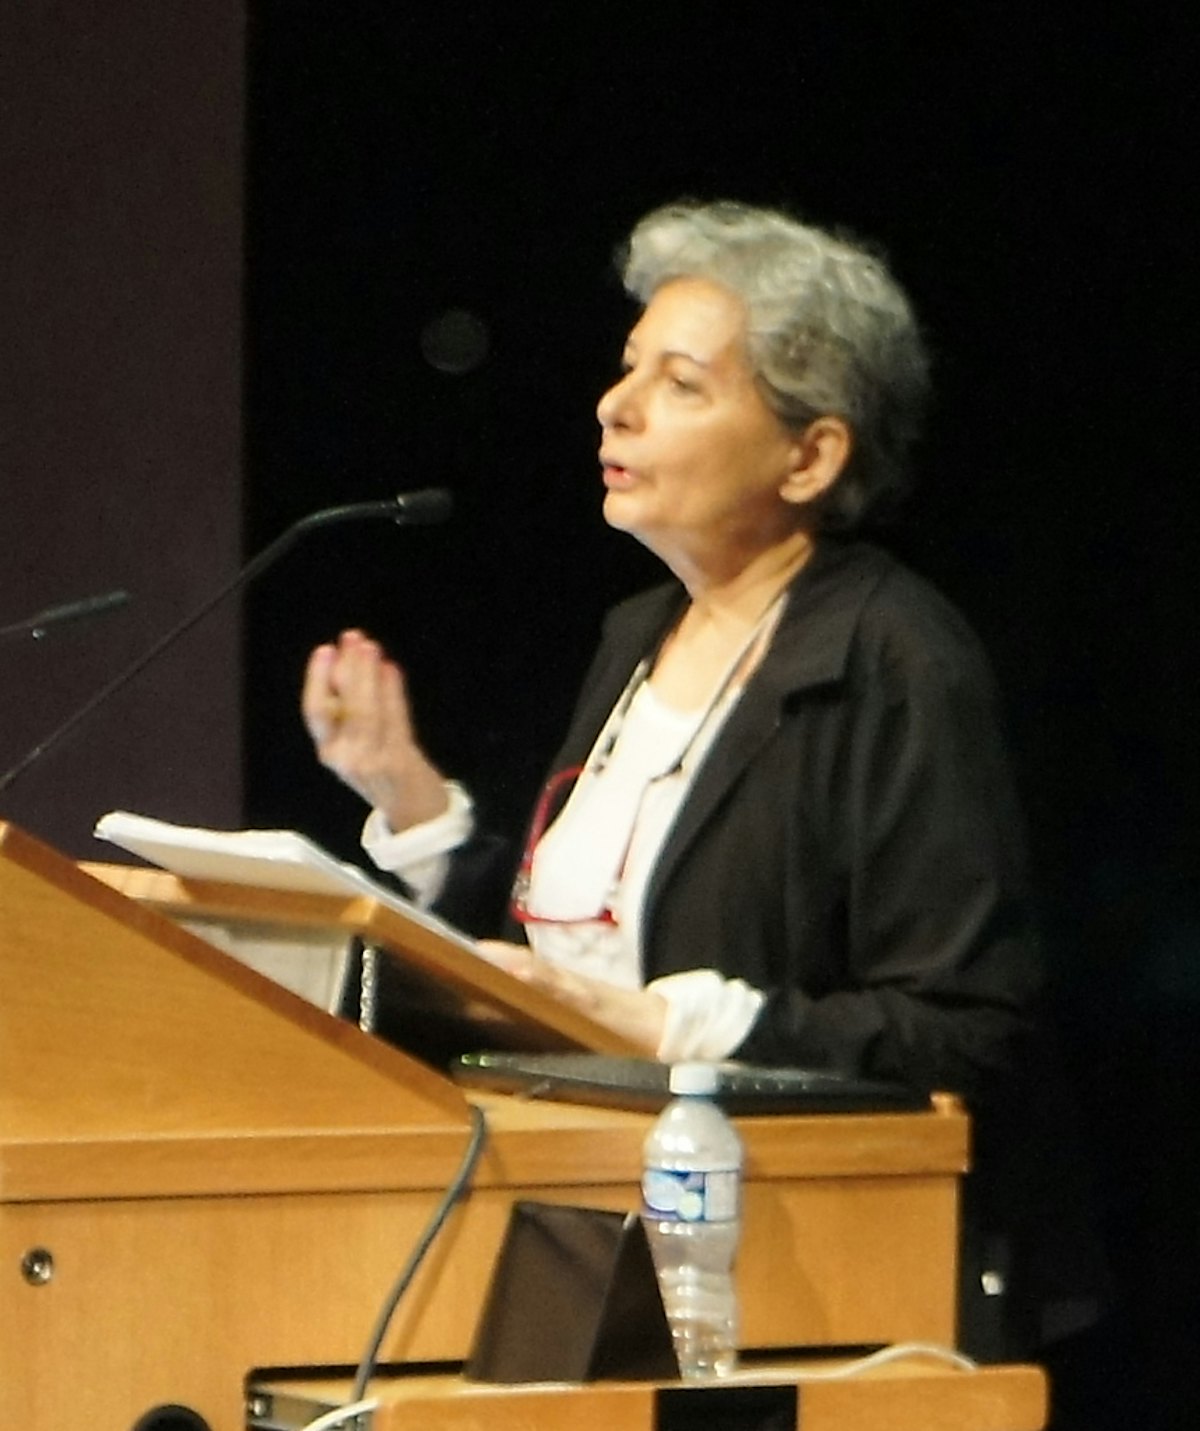 Mehrangiz Kar – a prominent Iranian lawyer and human rights activist – speaks about religious discrimination and violence in Iran, at the conference on "Intellectual Othering and the Baha'i Question in Iran," held at the University of Toronto, 1-3 July 2011.